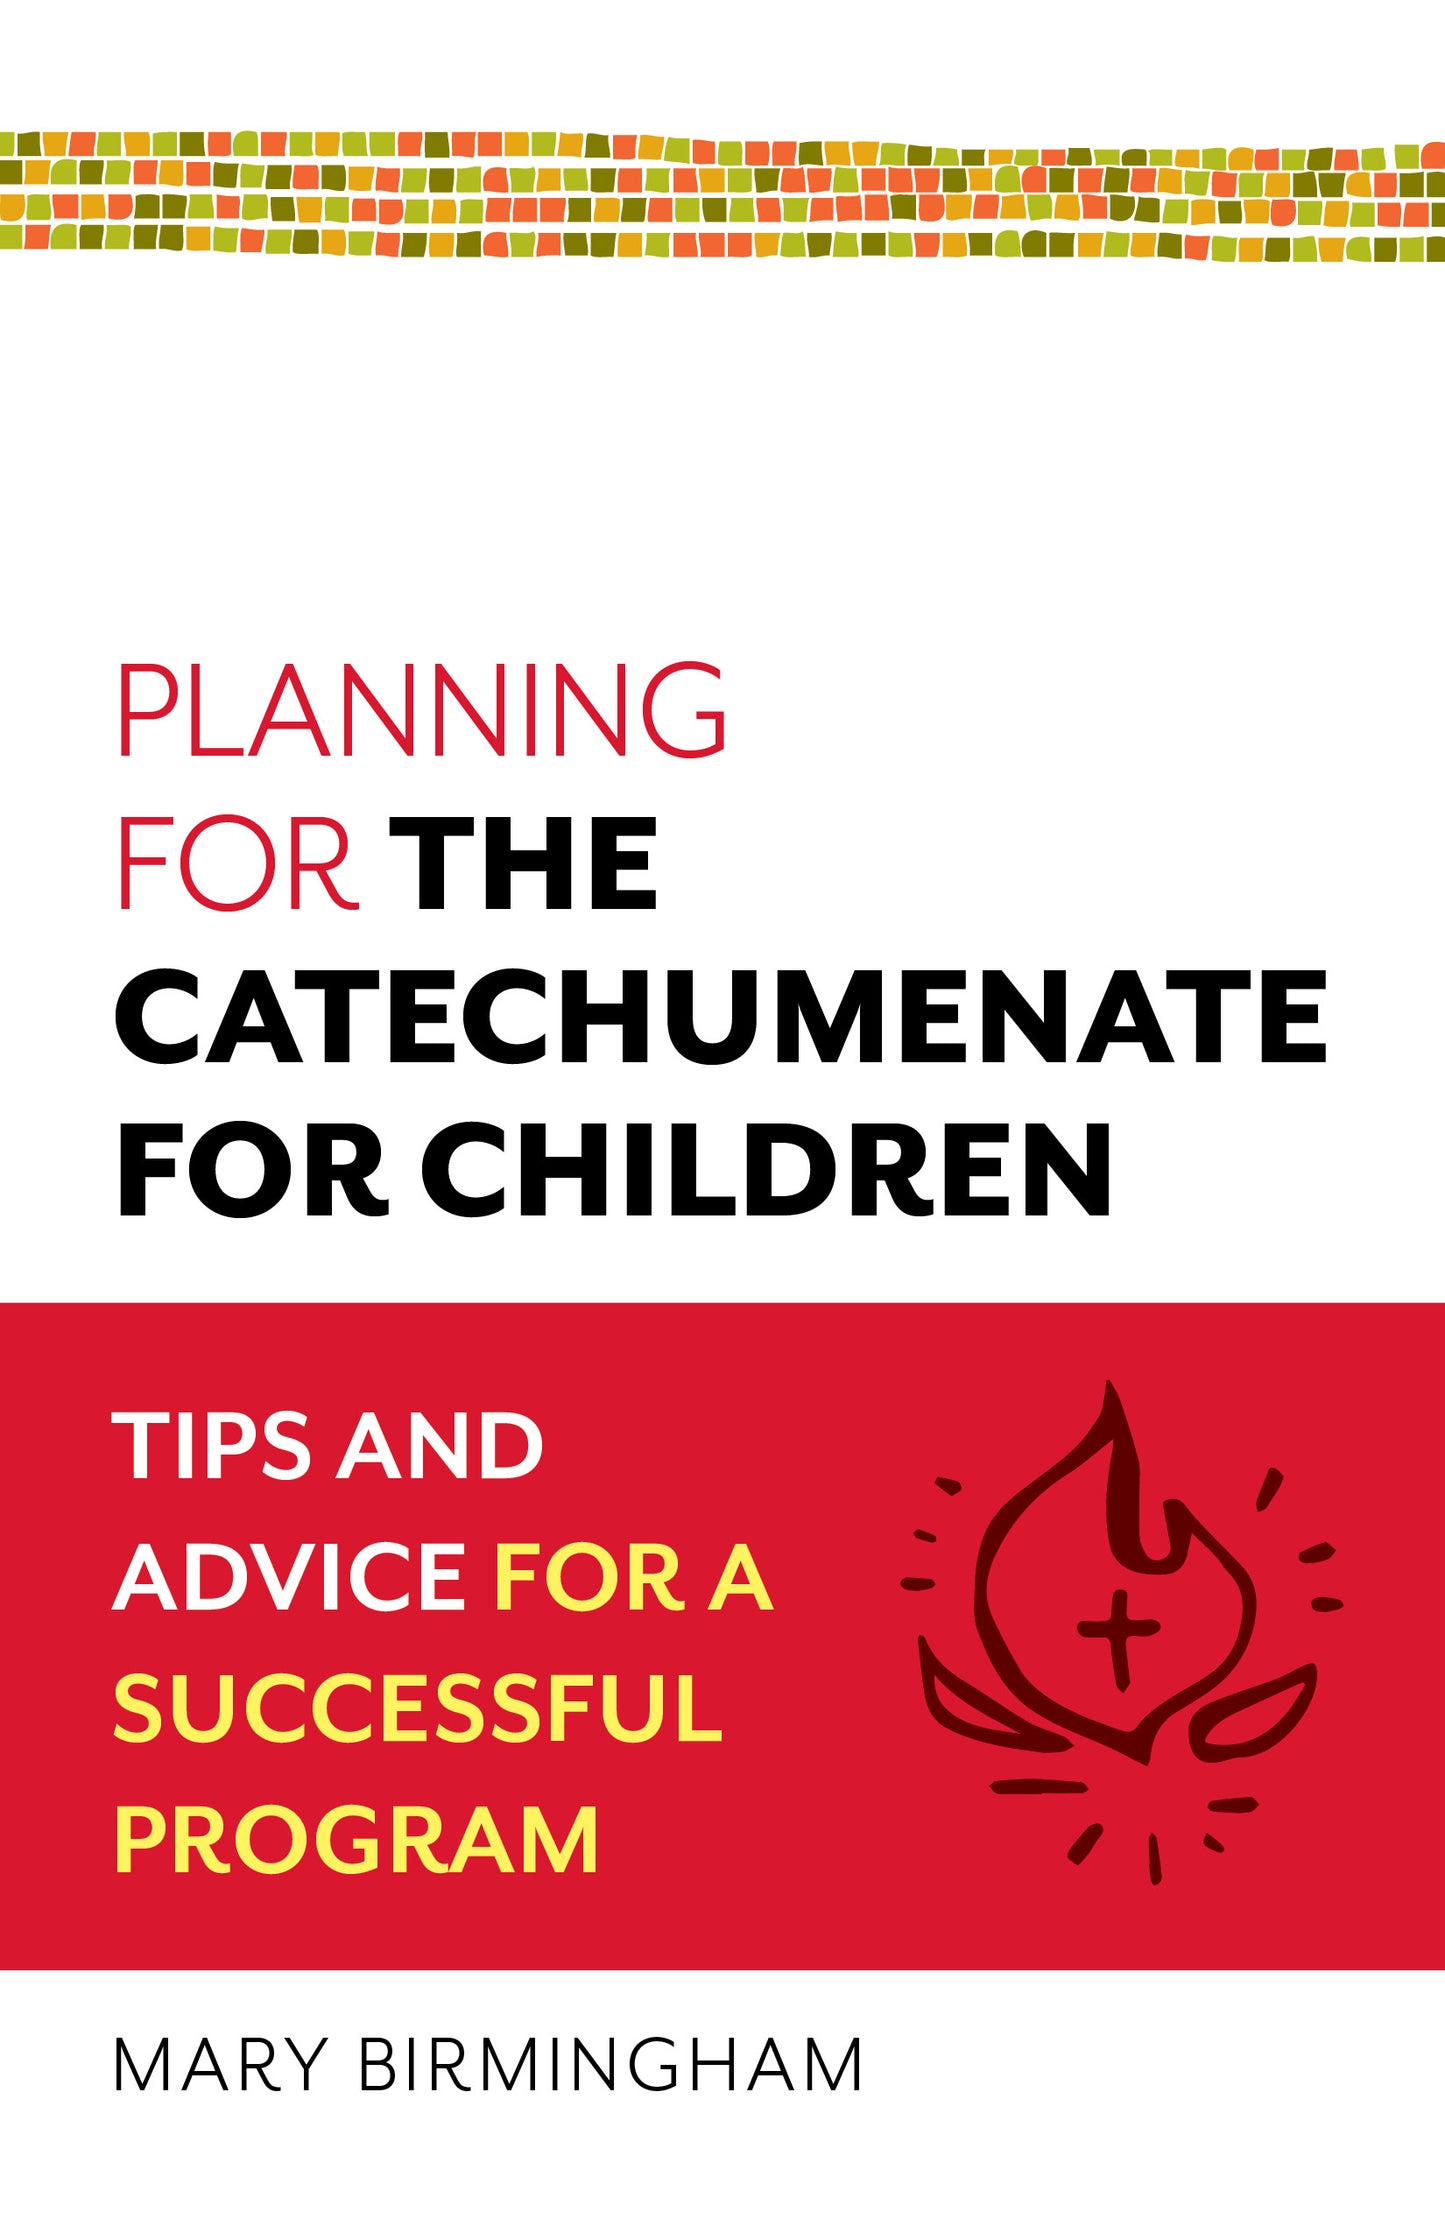 Planning for the Catechumenate for Children